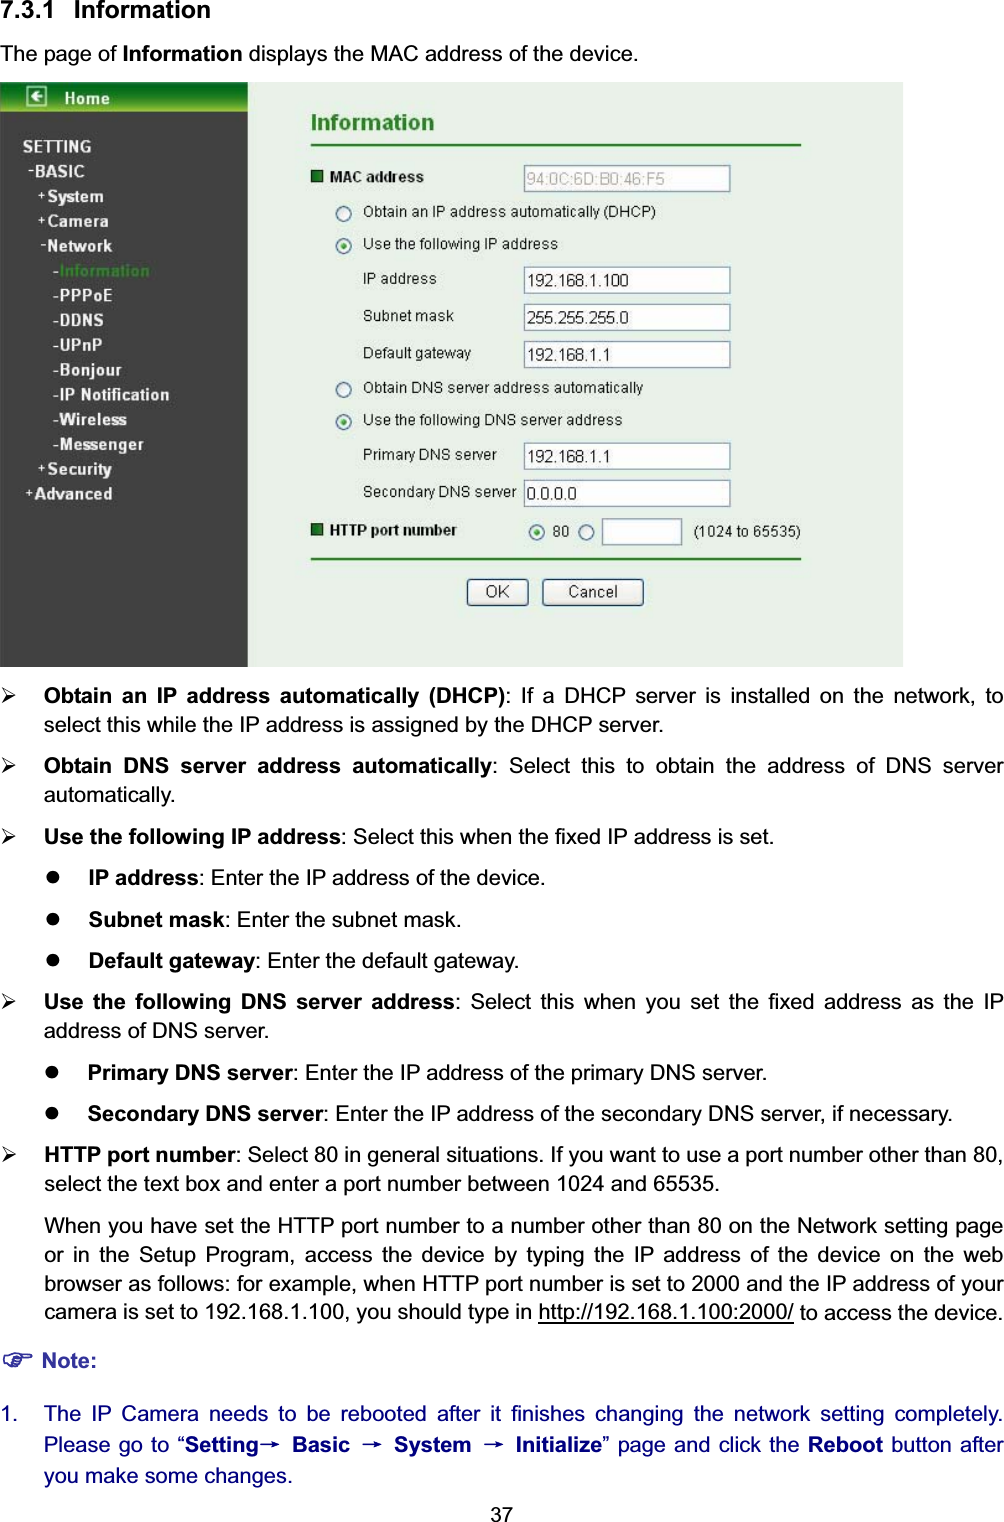  37 7.3.1 Information The page of Information displays the MAC address of the device.  ¾ Obtain an IP address automatically (DHCP): If a DHCP server is installed on the network, to select this while the IP address is assigned by the DHCP server.   ¾ Obtain DNS server address automatically: Select this to obtain the address of DNS server automatically. ¾ Use the following IP address: Select this when the fixed IP address is set. z IP address: Enter the IP address of the device. z Subnet mask: Enter the subnet mask. z Default gateway: Enter the default gateway. ¾ Use the following DNS server address: Select this when you set the fixed address as the IP address of DNS server. z Primary DNS server: Enter the IP address of the primary DNS server. z Secondary DNS server: Enter the IP address of the secondary DNS server, if necessary. ¾ HTTP port number: Select 80 in general situations. If you want to use a port number other than 80, select the text box and enter a port number between 1024 and 65535. When you have set the HTTP port number to a number other than 80 on the Network setting page or in the Setup Program, access the device by typing the IP address of the device on the web browser as follows: for example, when HTTP port number is set to 2000 and the IP address of your camera is set to 192.168.1.100, you should type in http://192.168.1.100:2000/ to access the device. ) Note: 1.  The IP Camera needs to be rebooted after it finishes changing the network setting completely. Please go to “Settingė Basic ė System ė Initialize” page and click the Reboot button after you make some changes.   